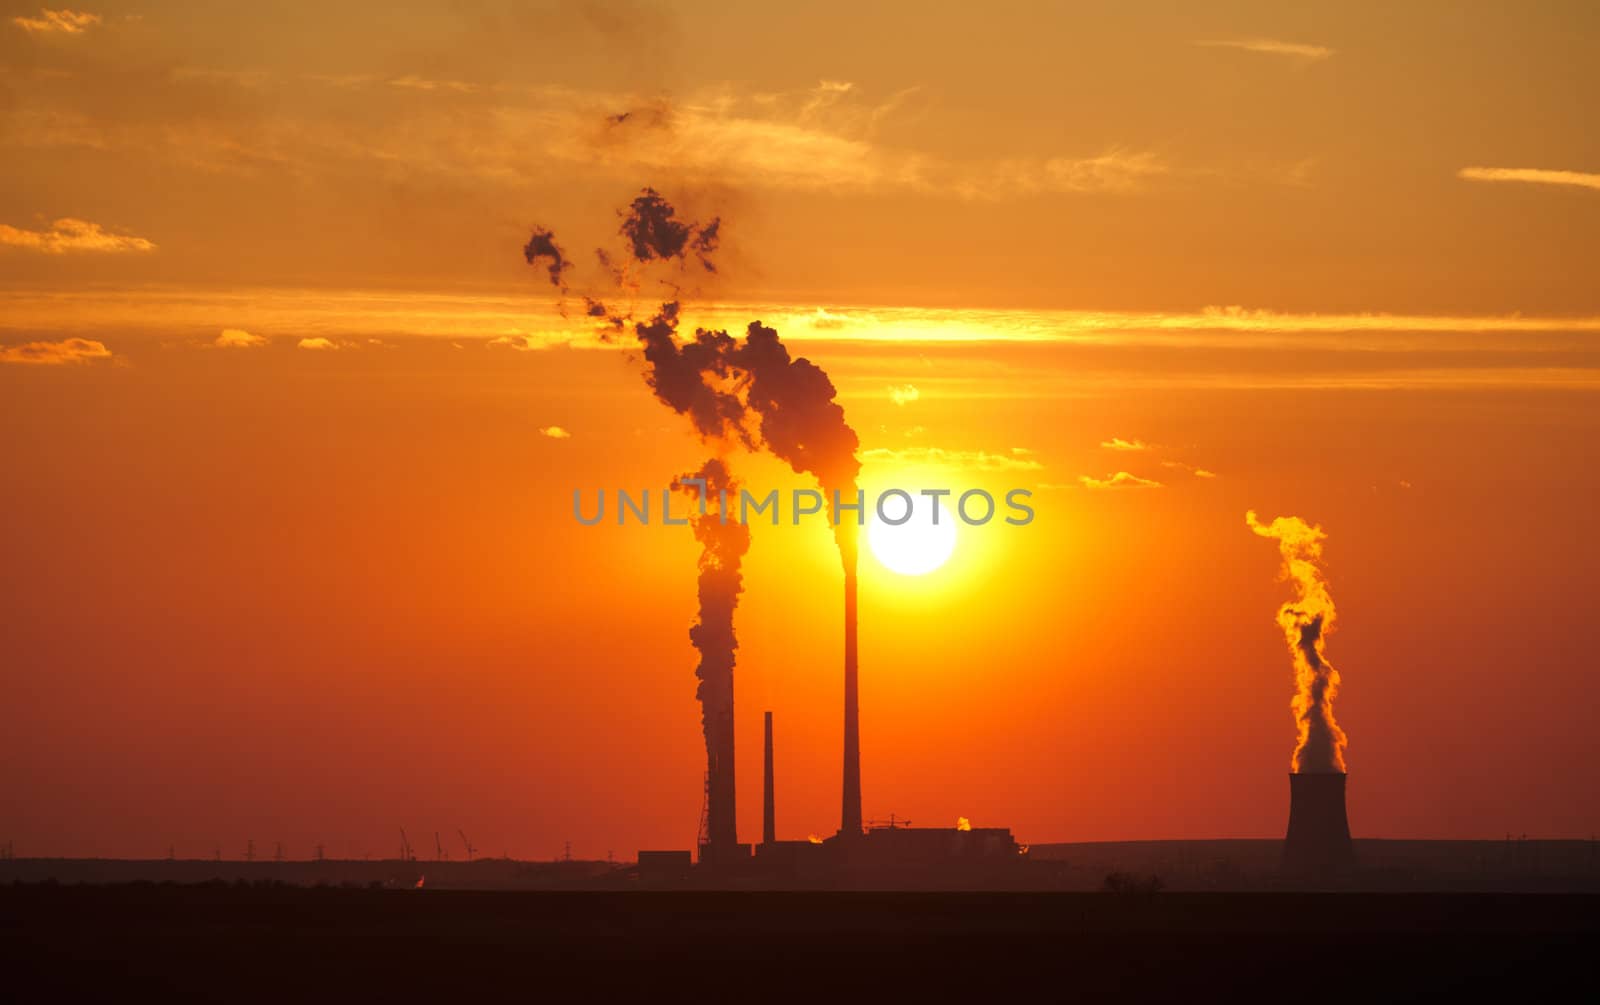 Large electric plant at sunset emitting poison in the air